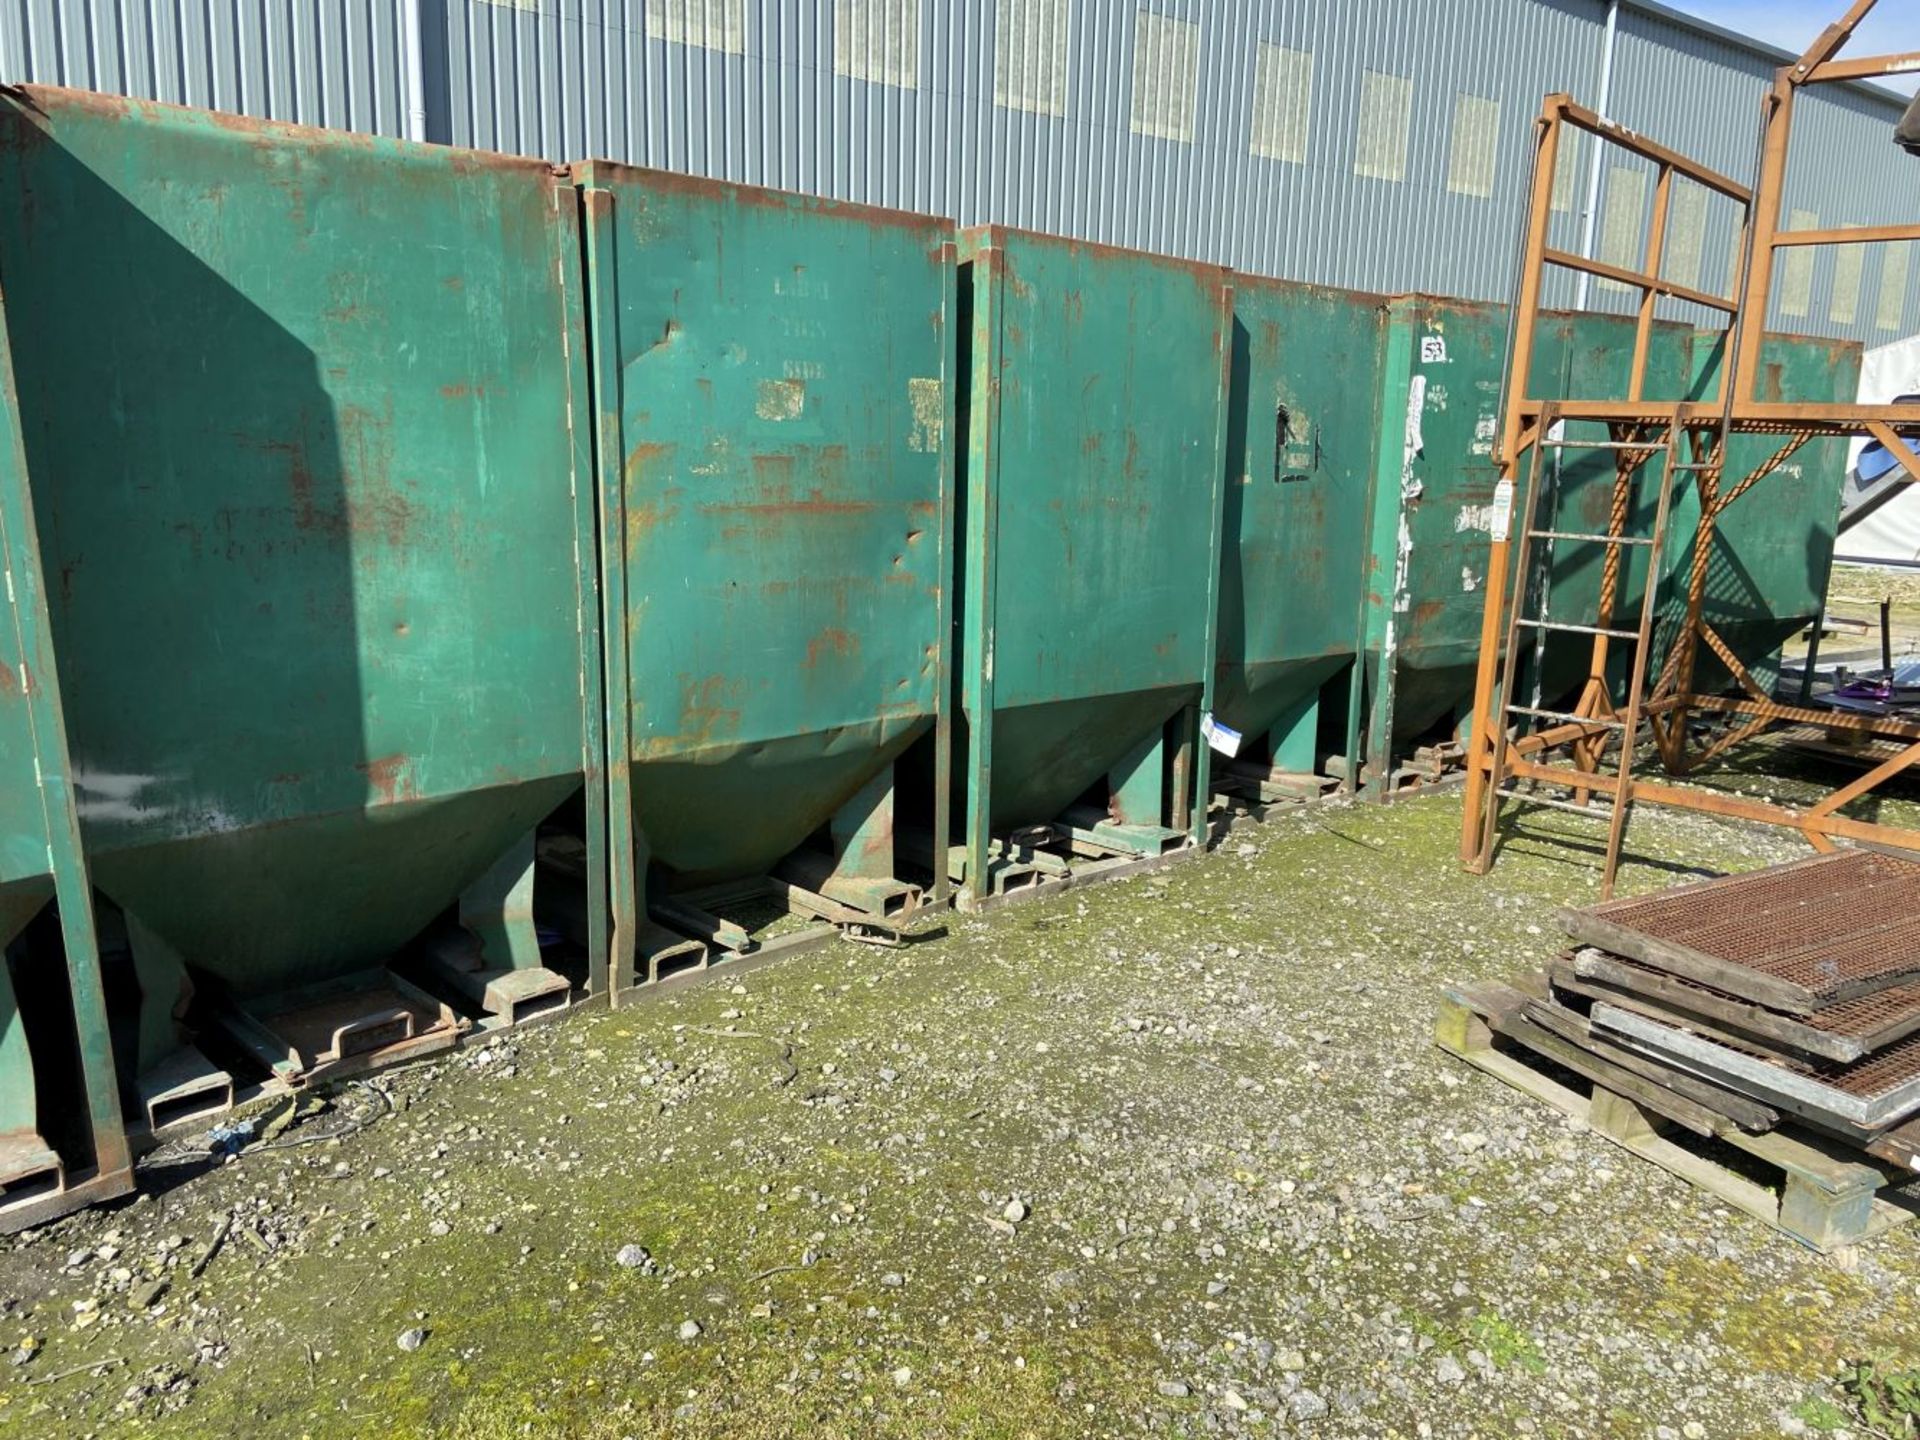 13 Steel Hopper Bottomed Tote Bins, each approx. 1.2m x 1.2m x 2m deep (in one line); lot located - Image 2 of 2